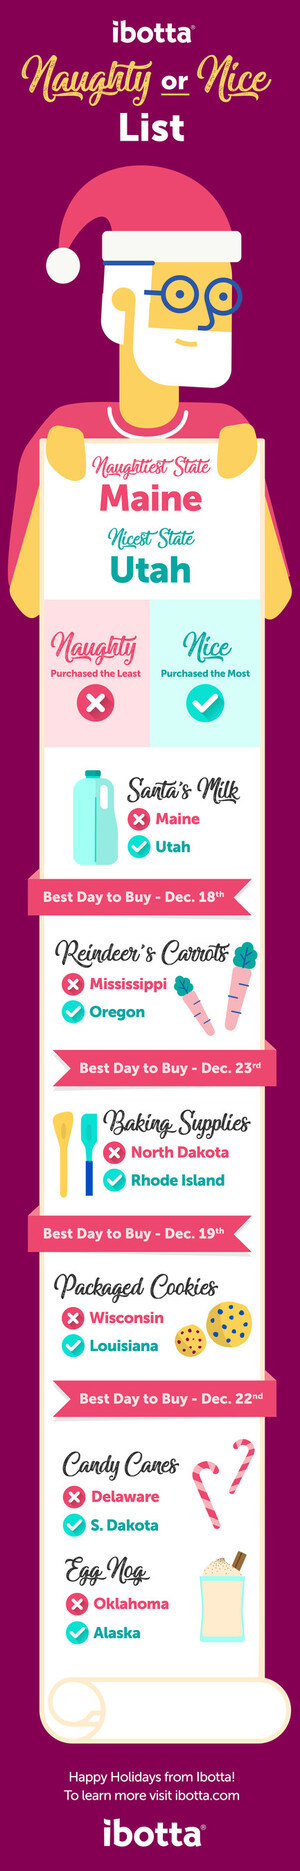 Ibotta Announces Naughty or Nice List, Reveals Which States Have Most, Least Holiday Spirit